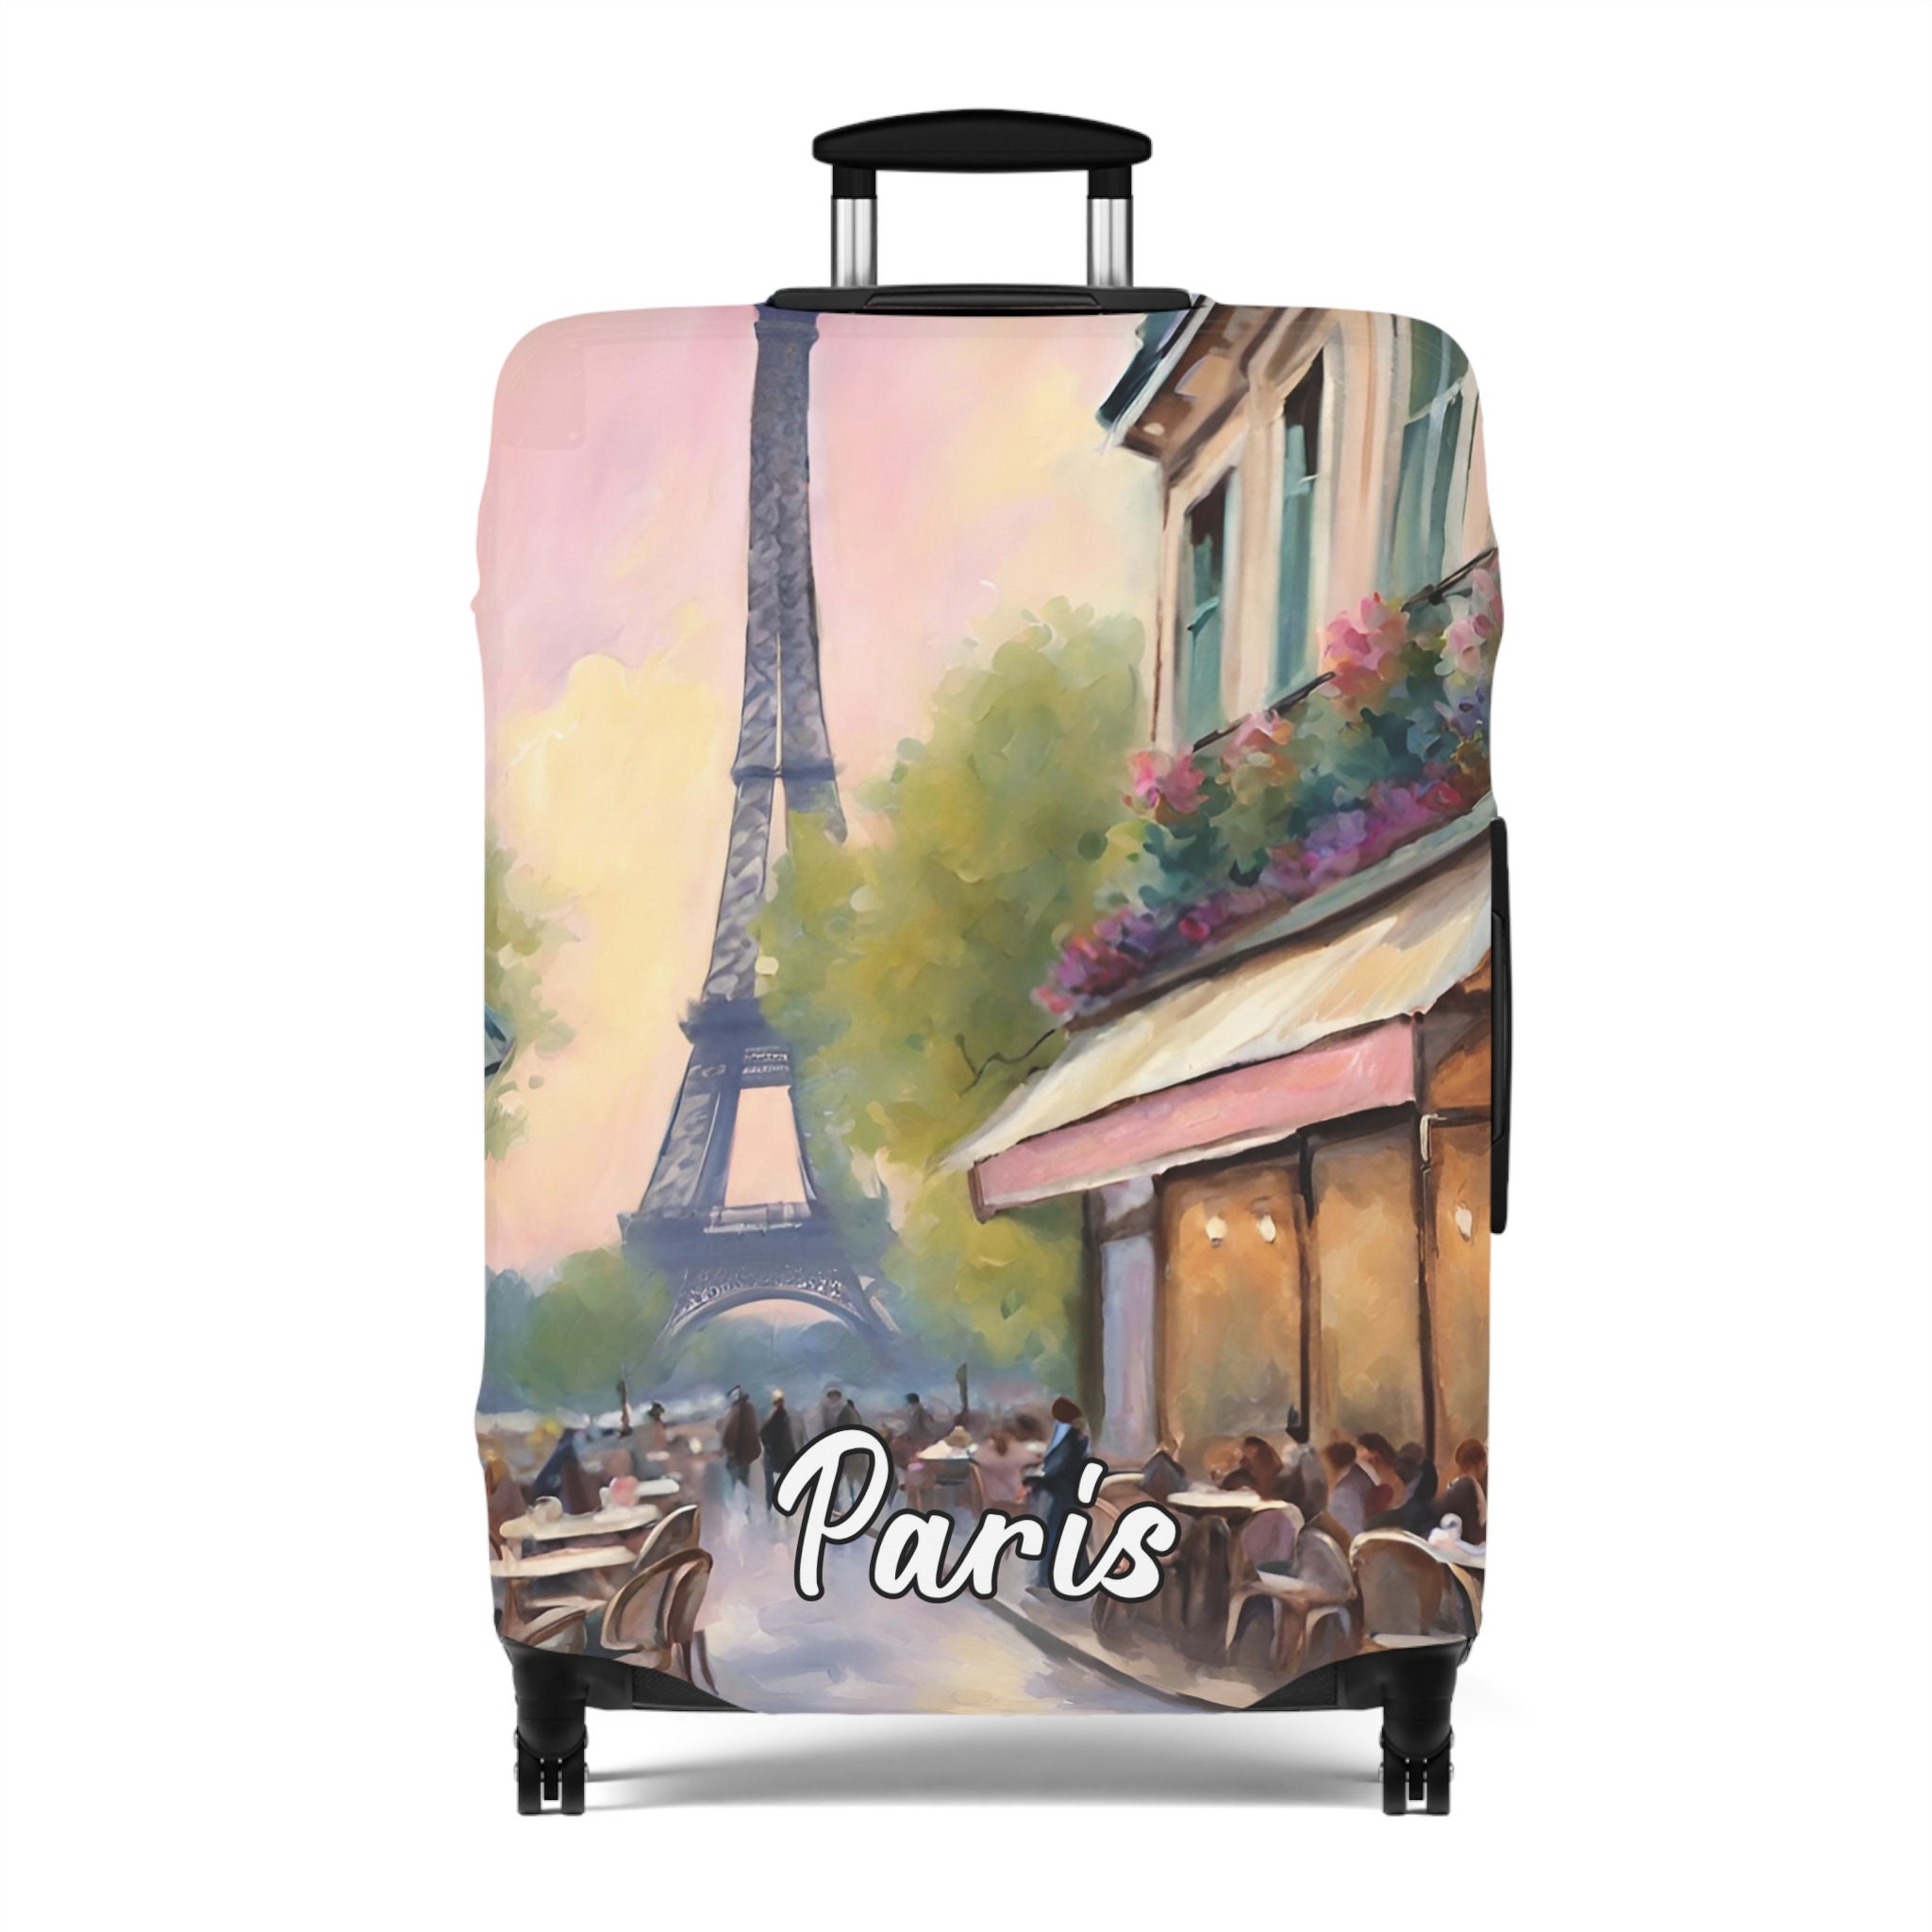 Eiffel Tower Luggage Cover, Unique Luggage Cover